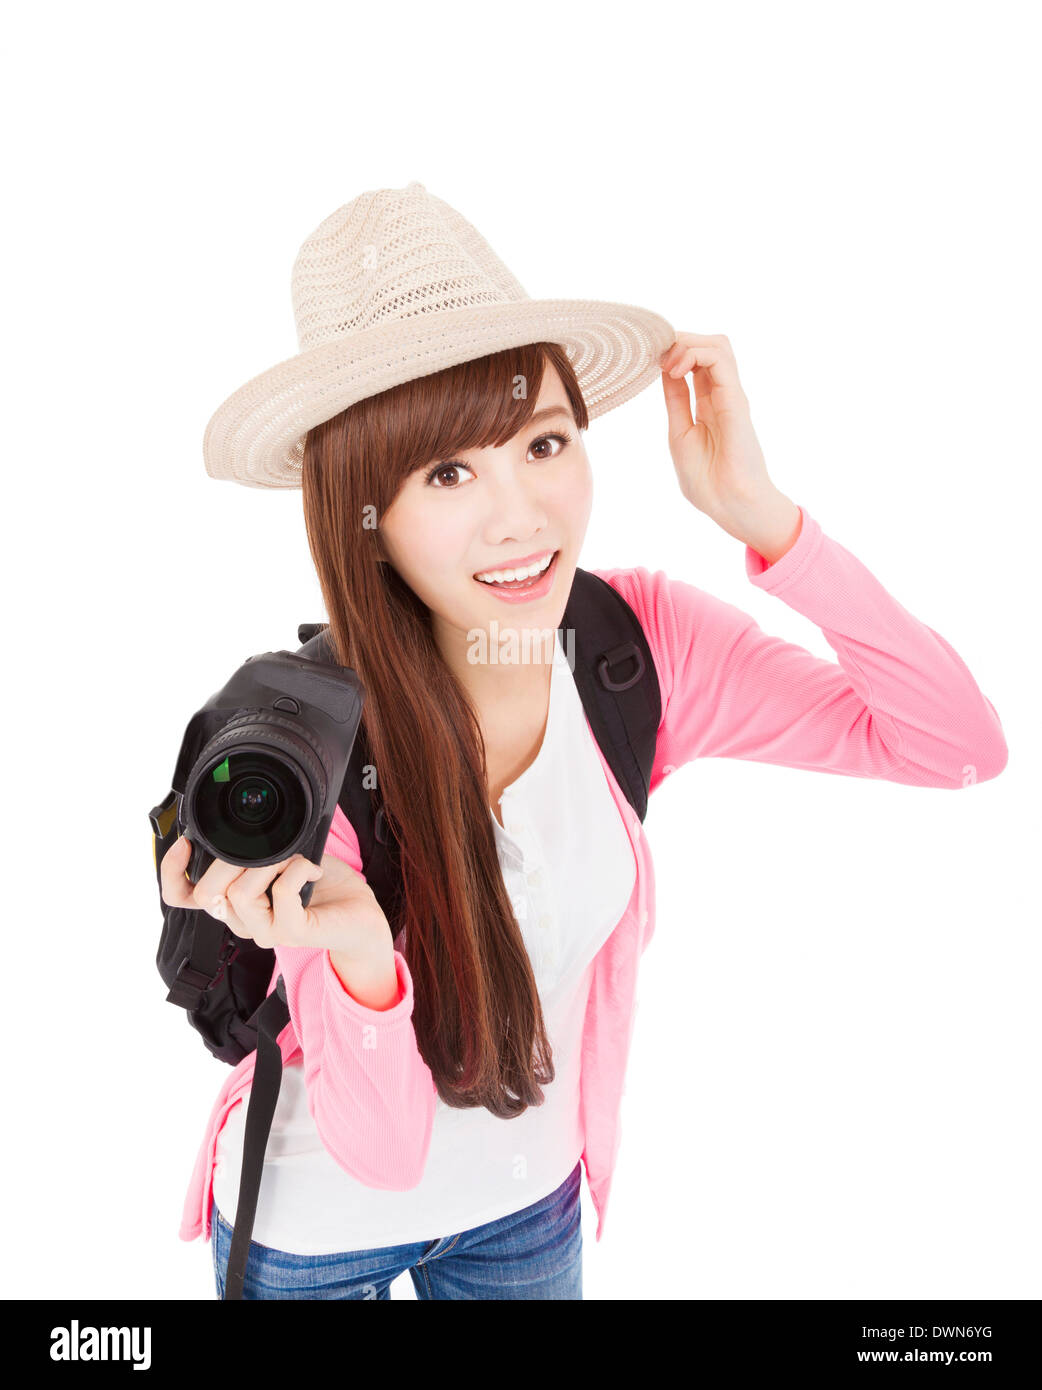 Smiling young woman holding a camera et hat.isolated on white Banque D'Images